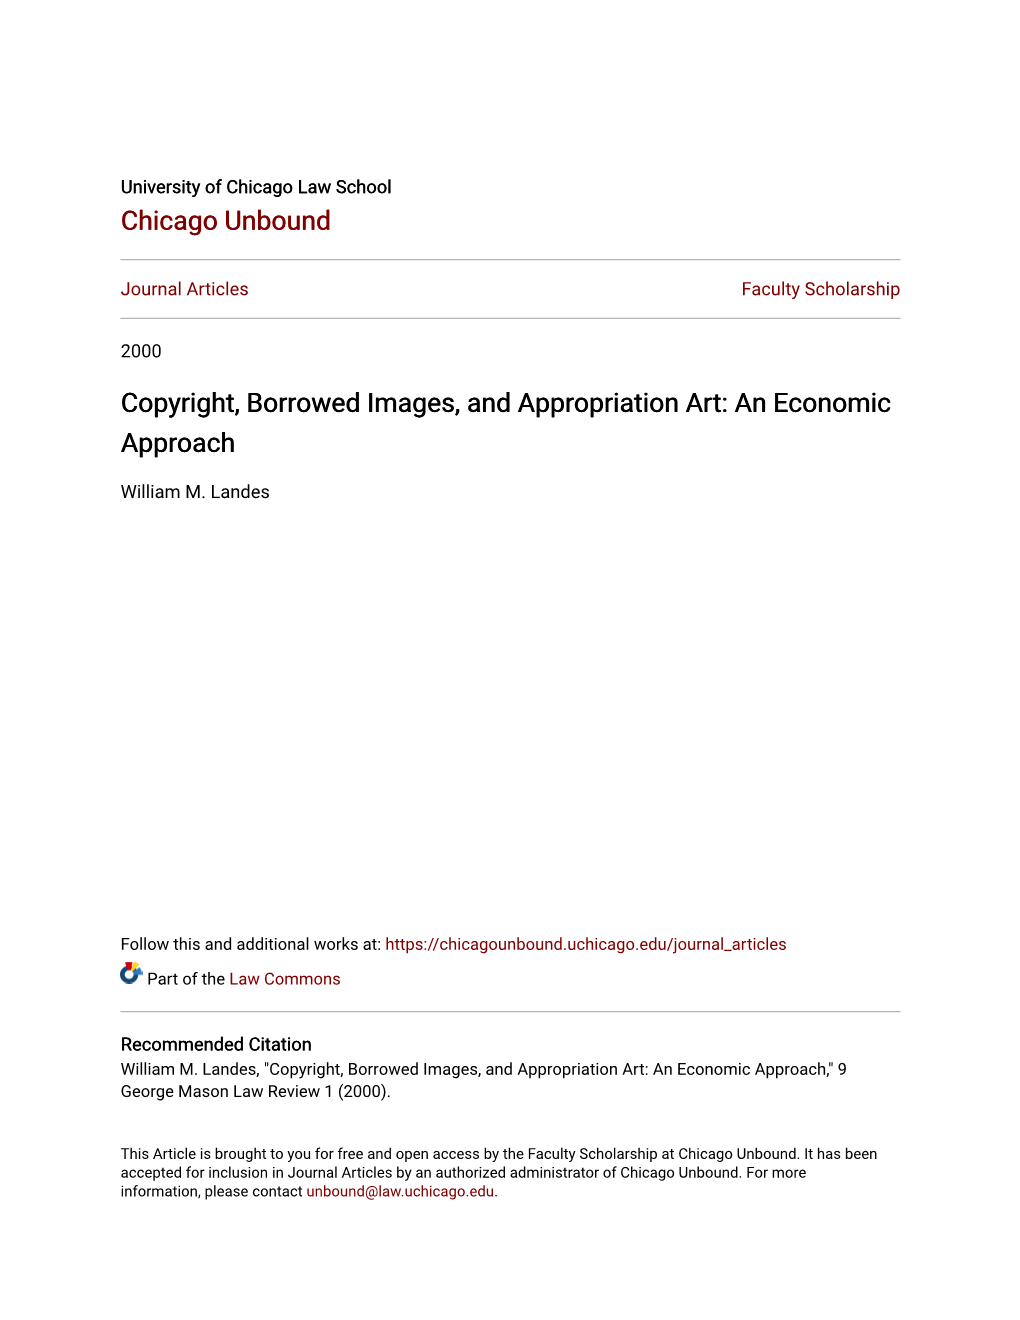 Copyright, Borrowed Images, and Appropriation Art: an Economic Approach